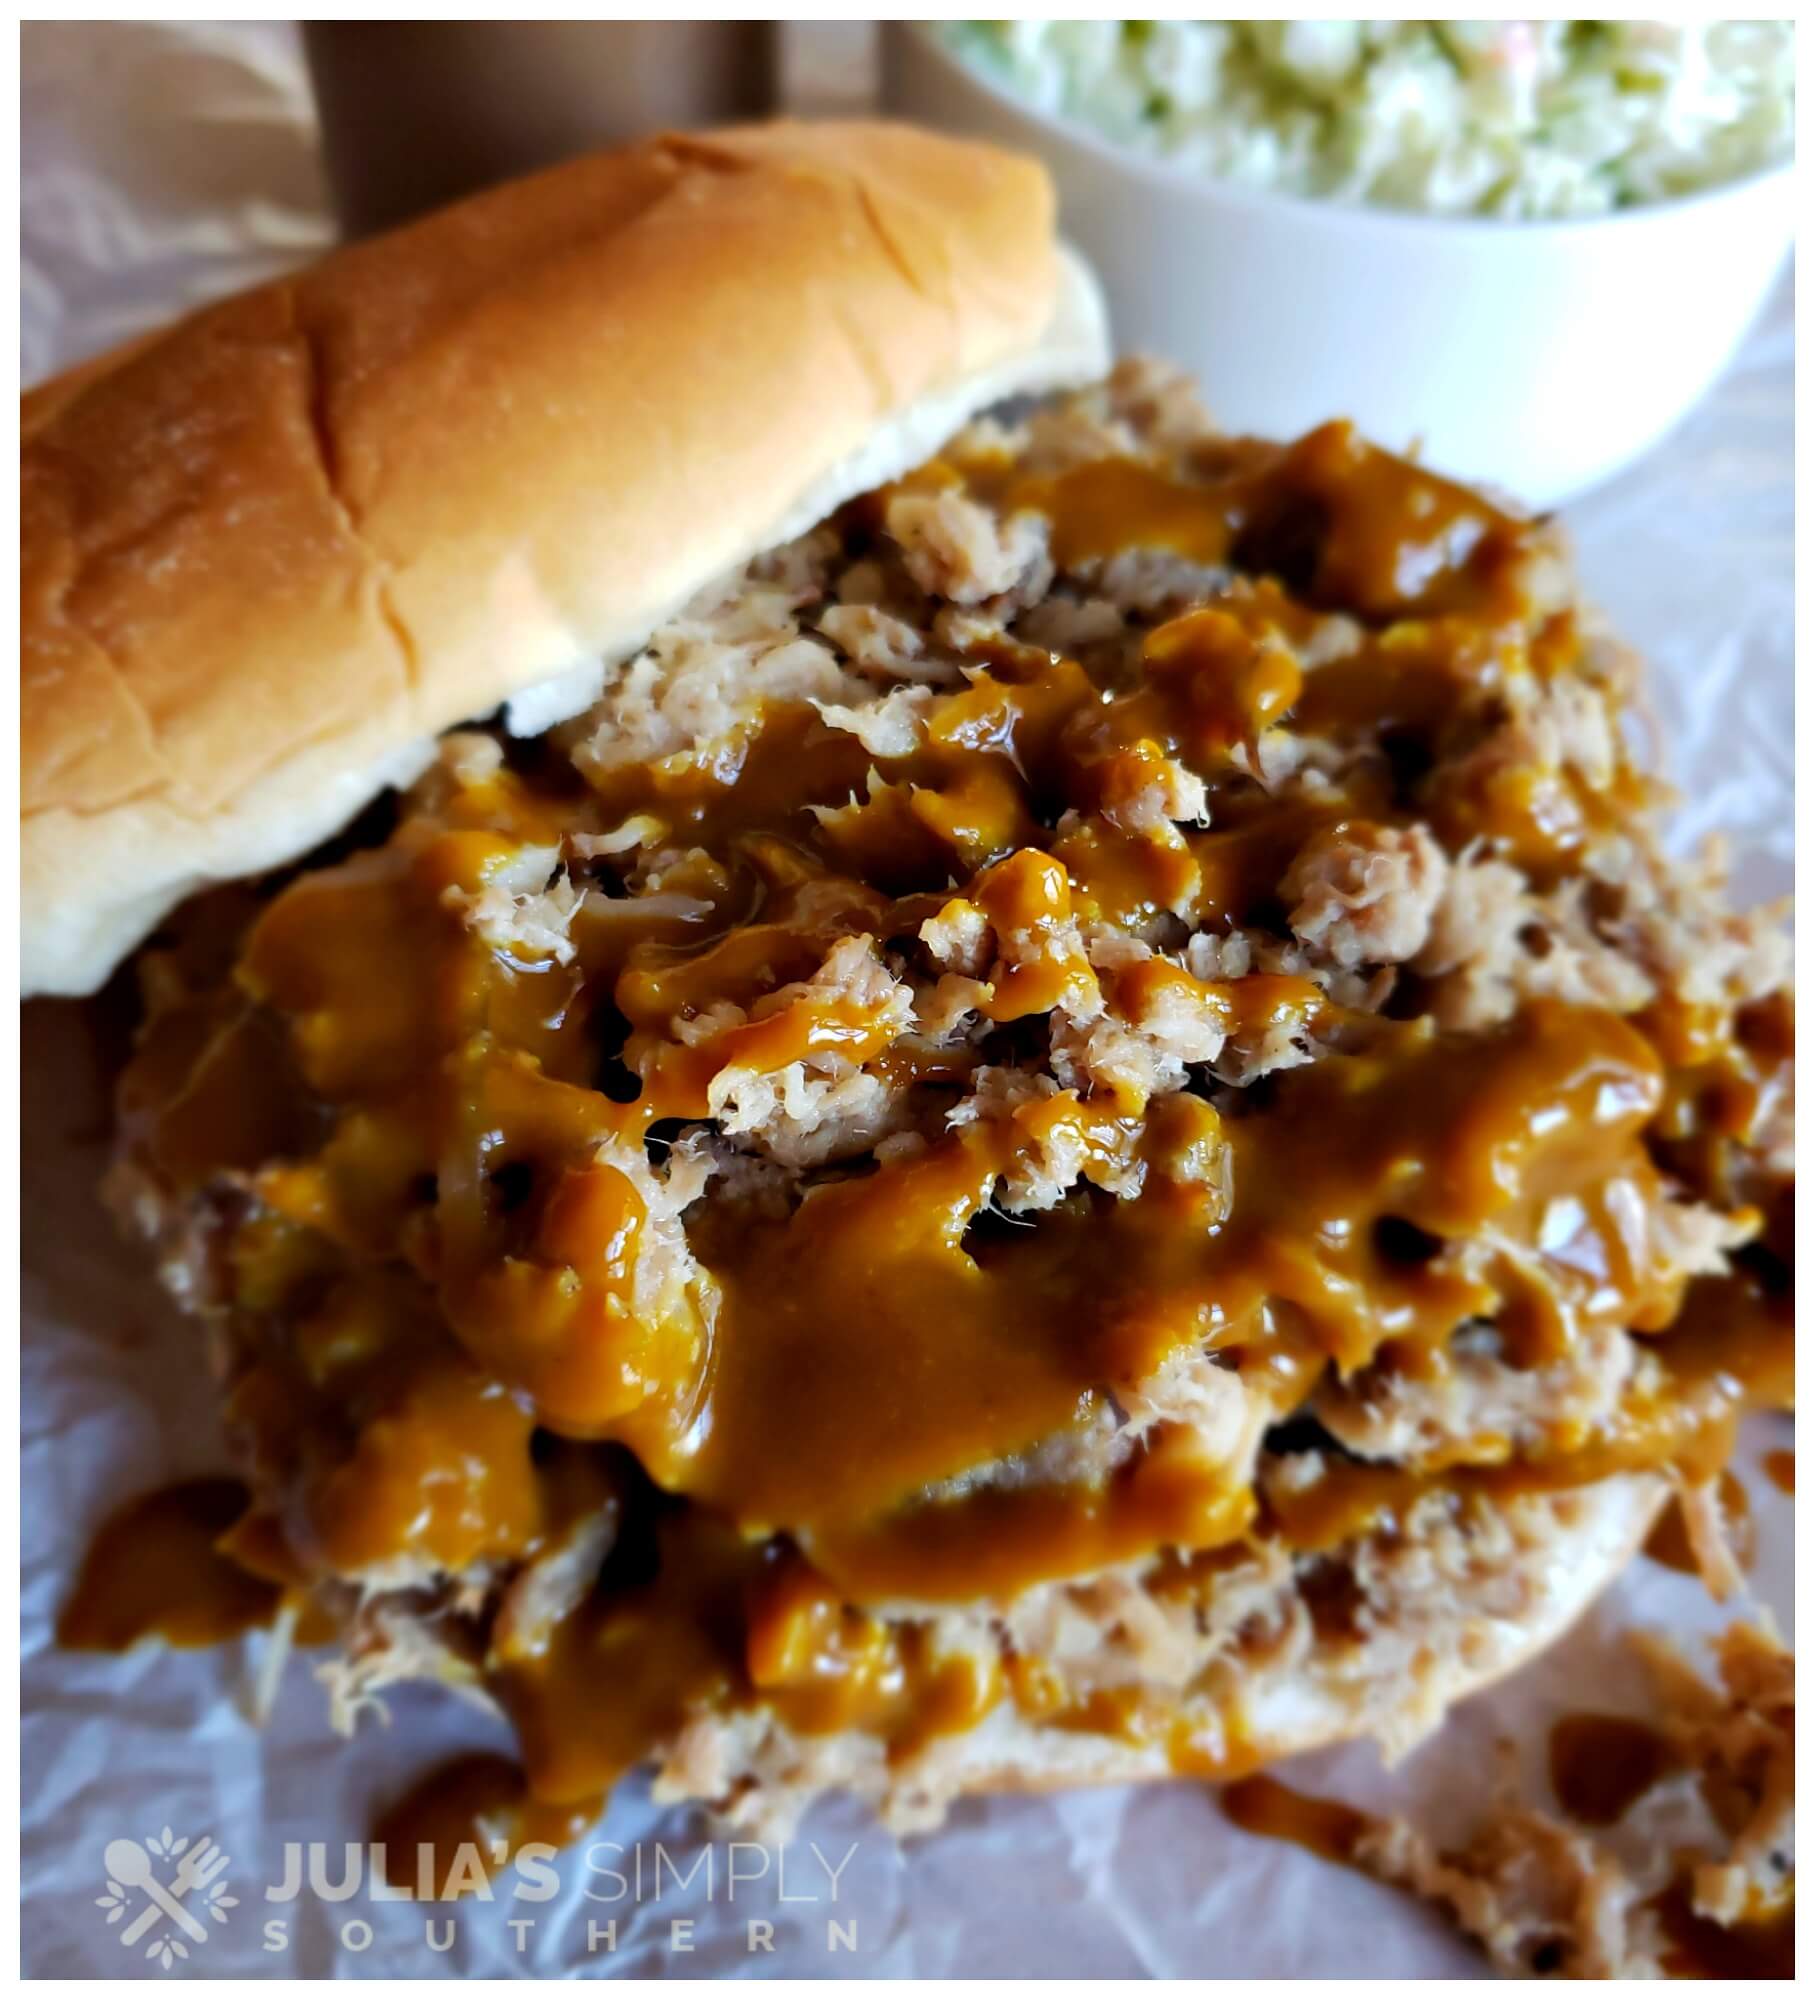 Carolina Gold drizzled over pulled pork on a bun